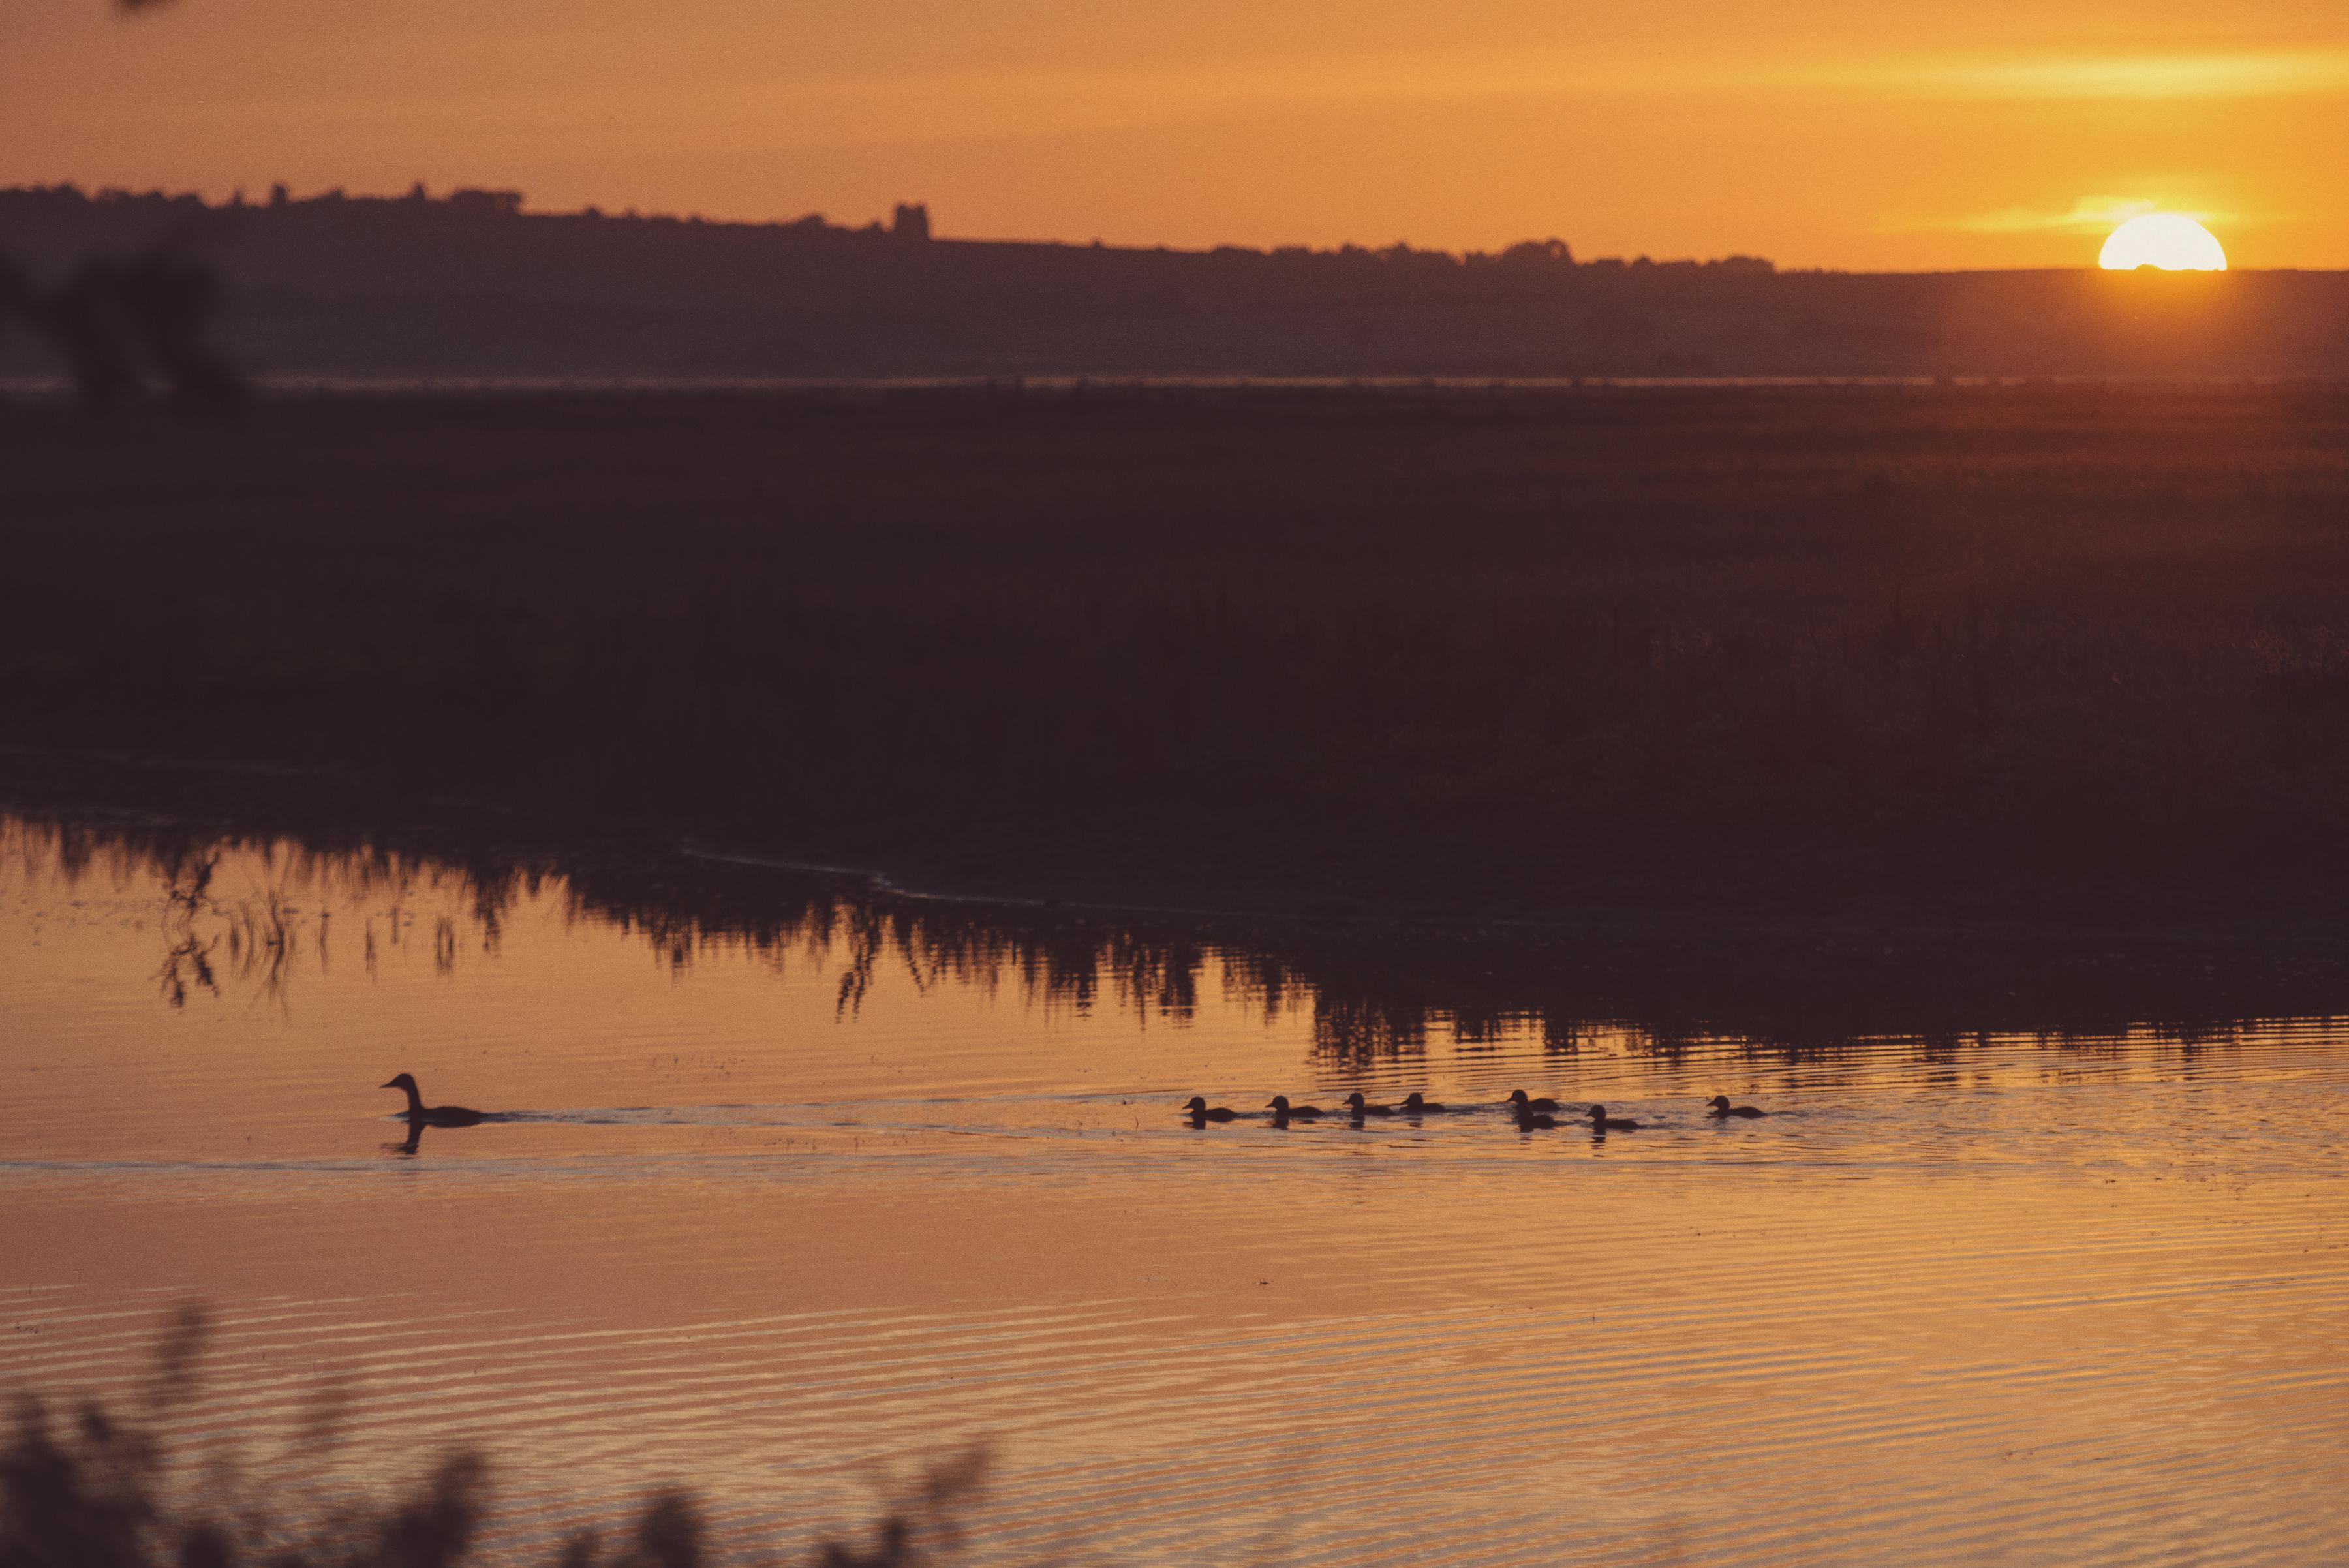 Sunrises at Elmley Nature Reserve, the perfect cabin stay